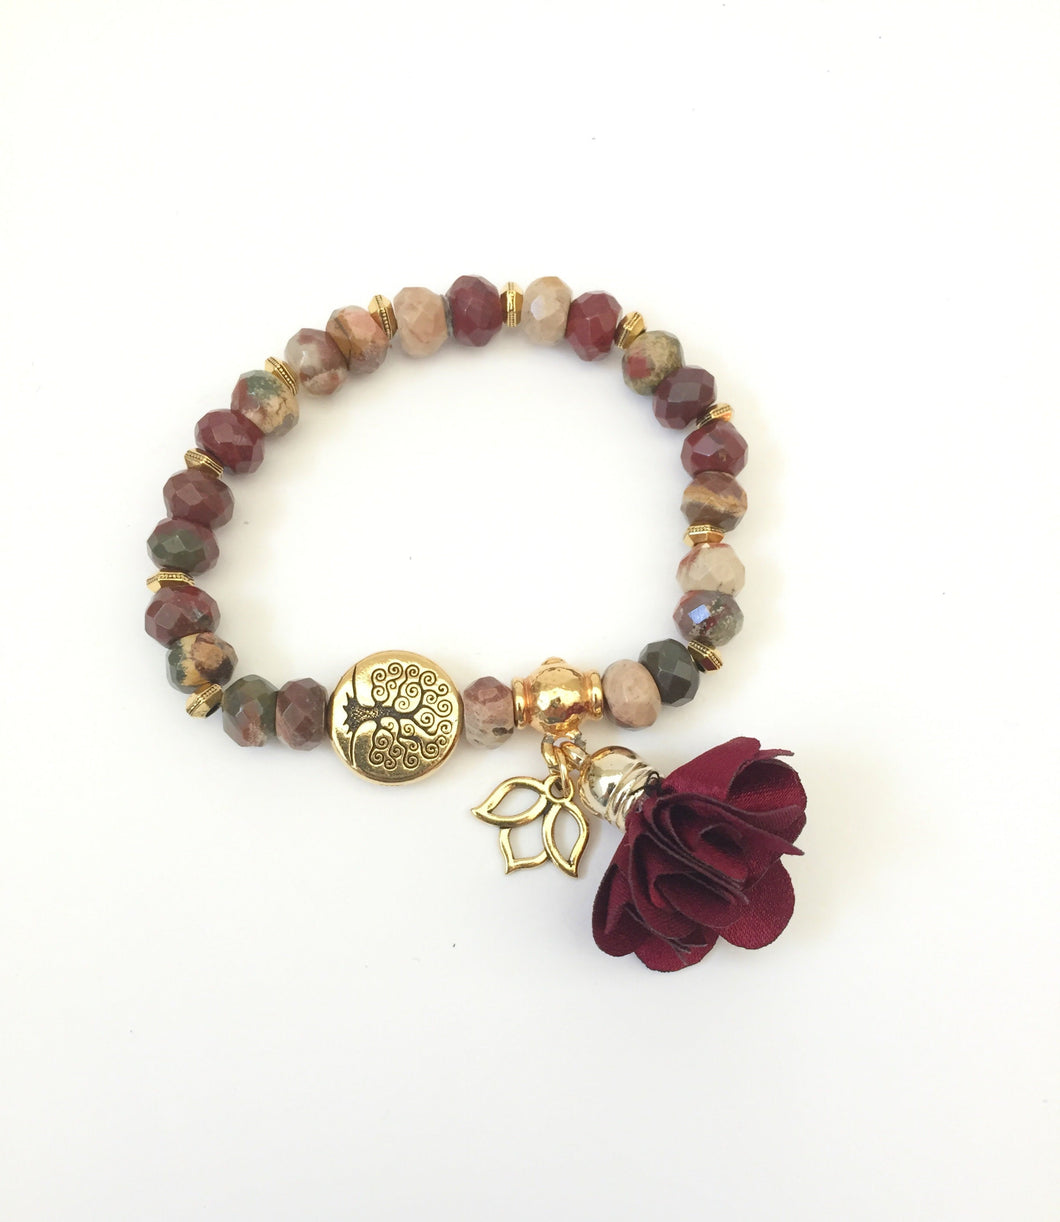 Beaded Jasper Gemstone Stretch Bracelet With Tree Of Life And Lotus Charm And Tassel